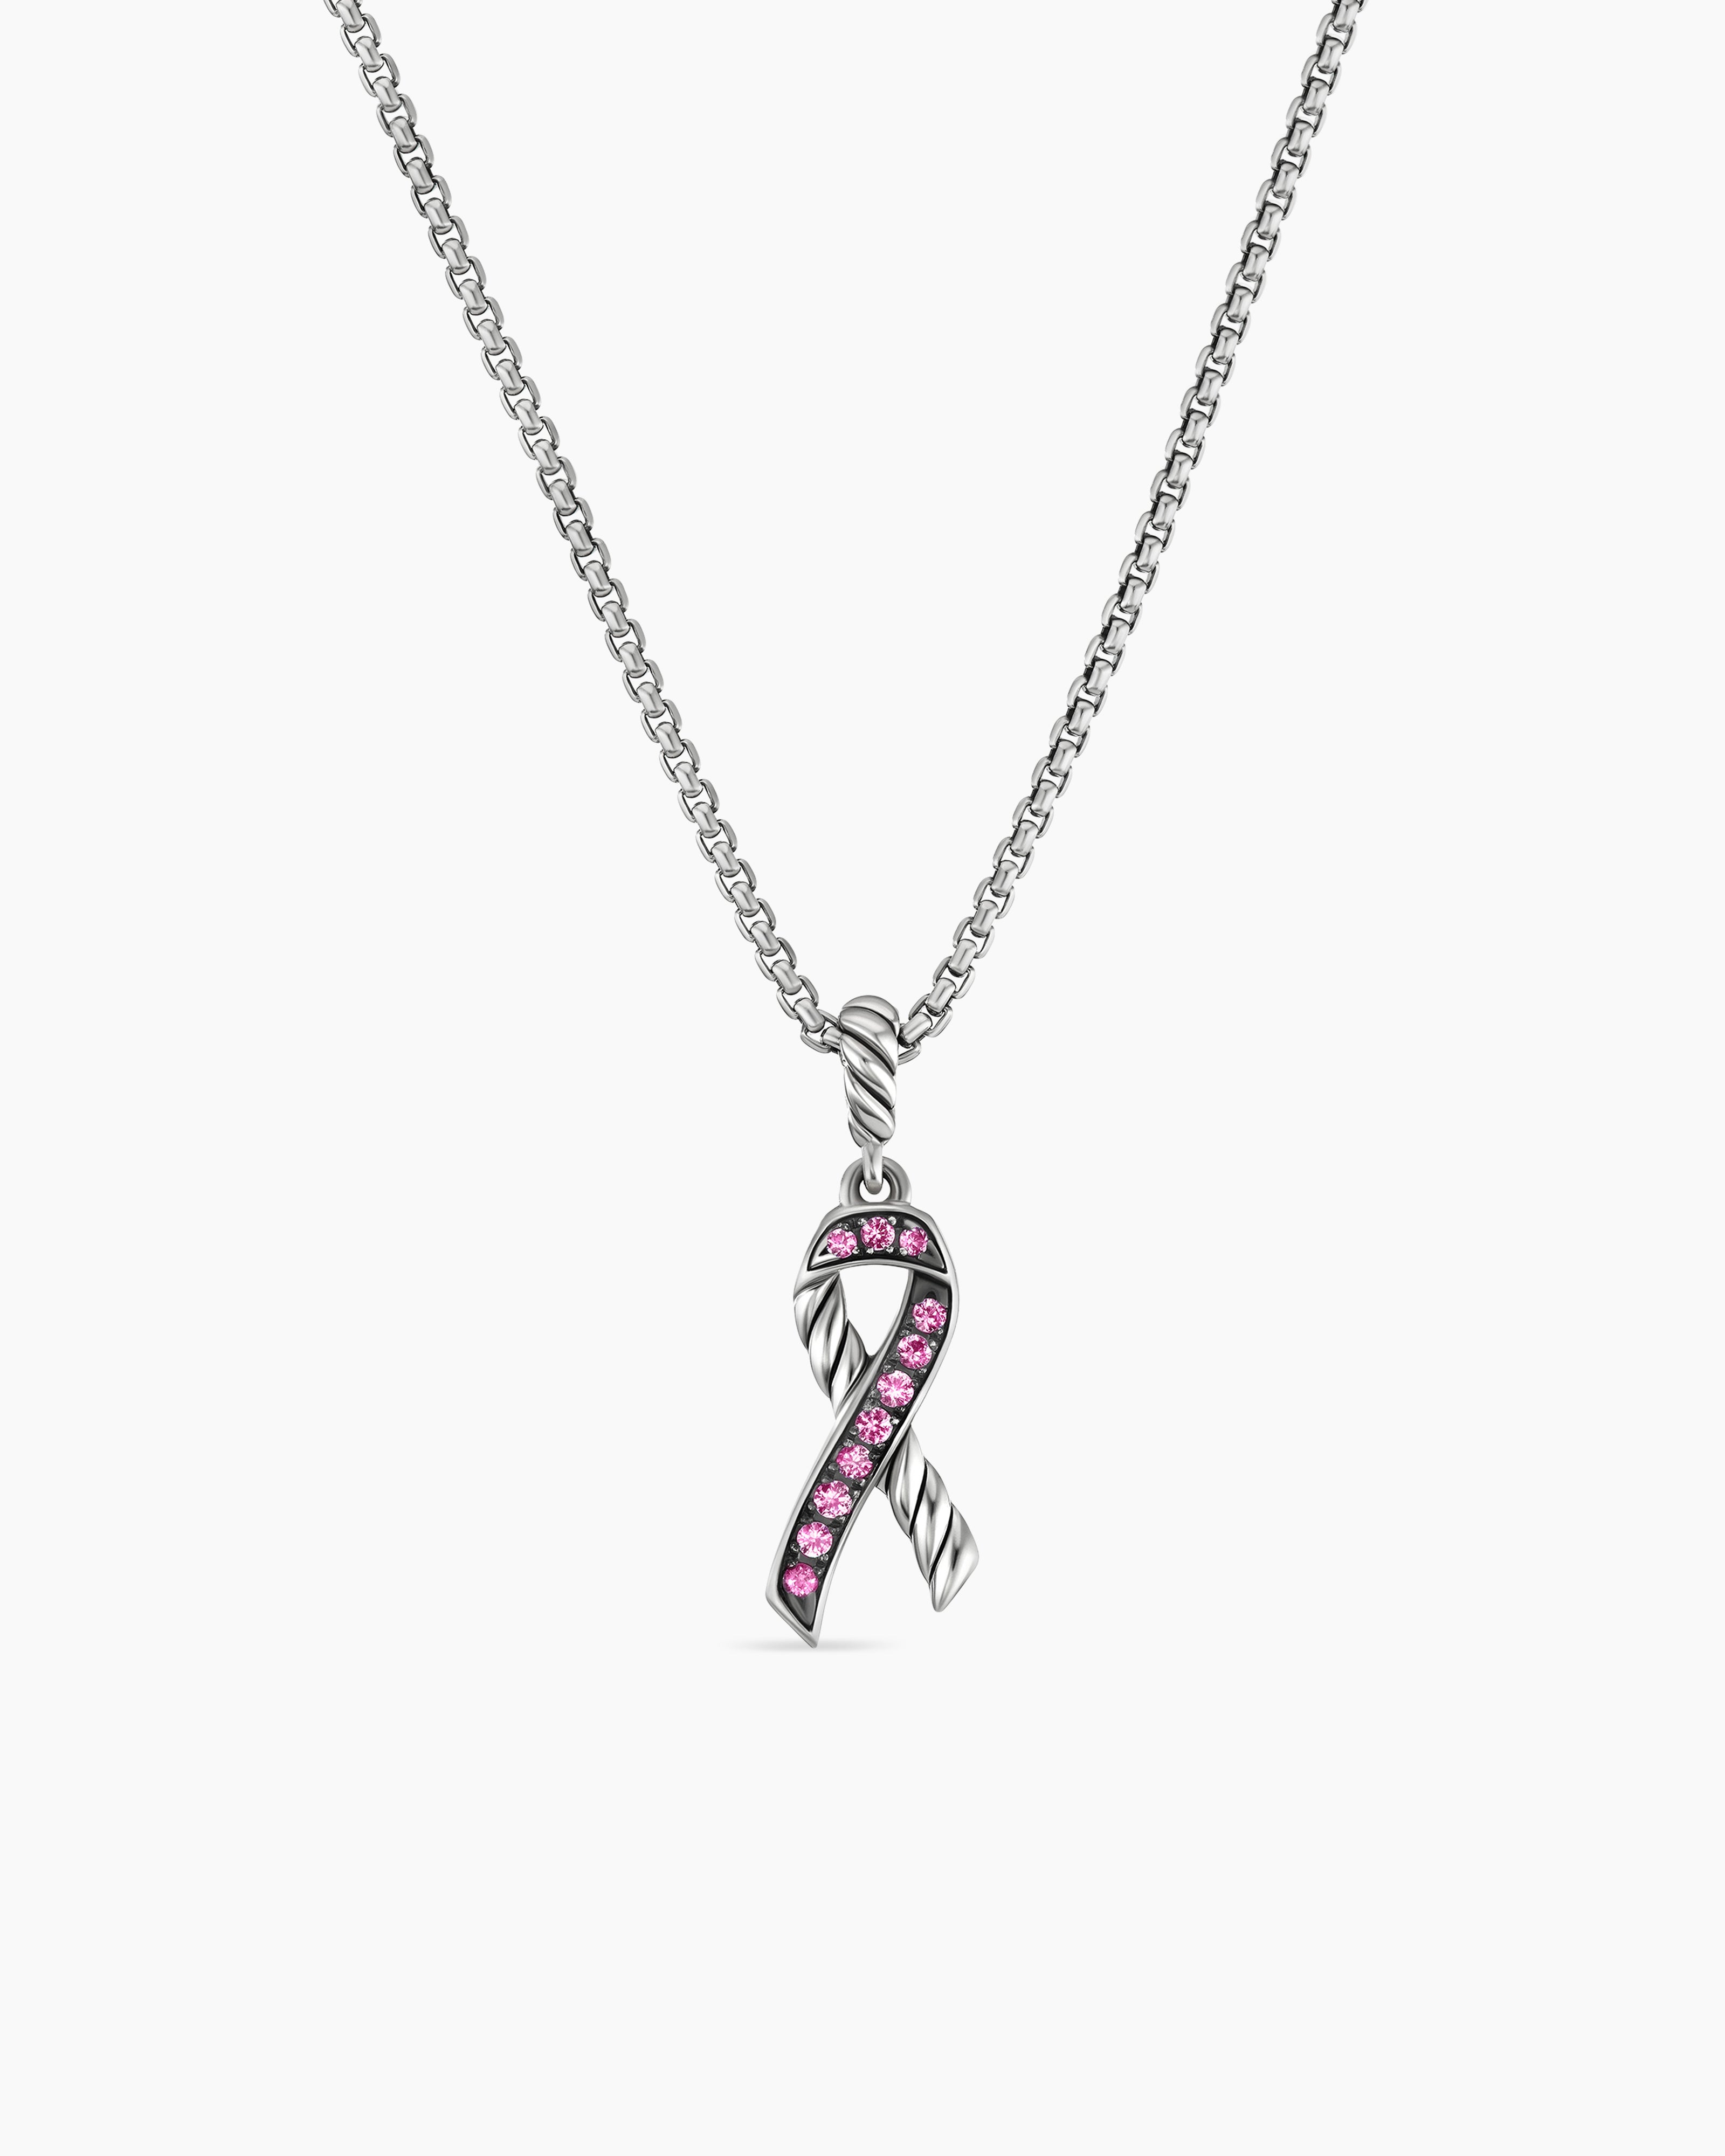 David Yurman Cable Collectibles Ribbon Necklace in Sterling Silver with Pink Sapphires, 24.4mm Women's Size 17 in